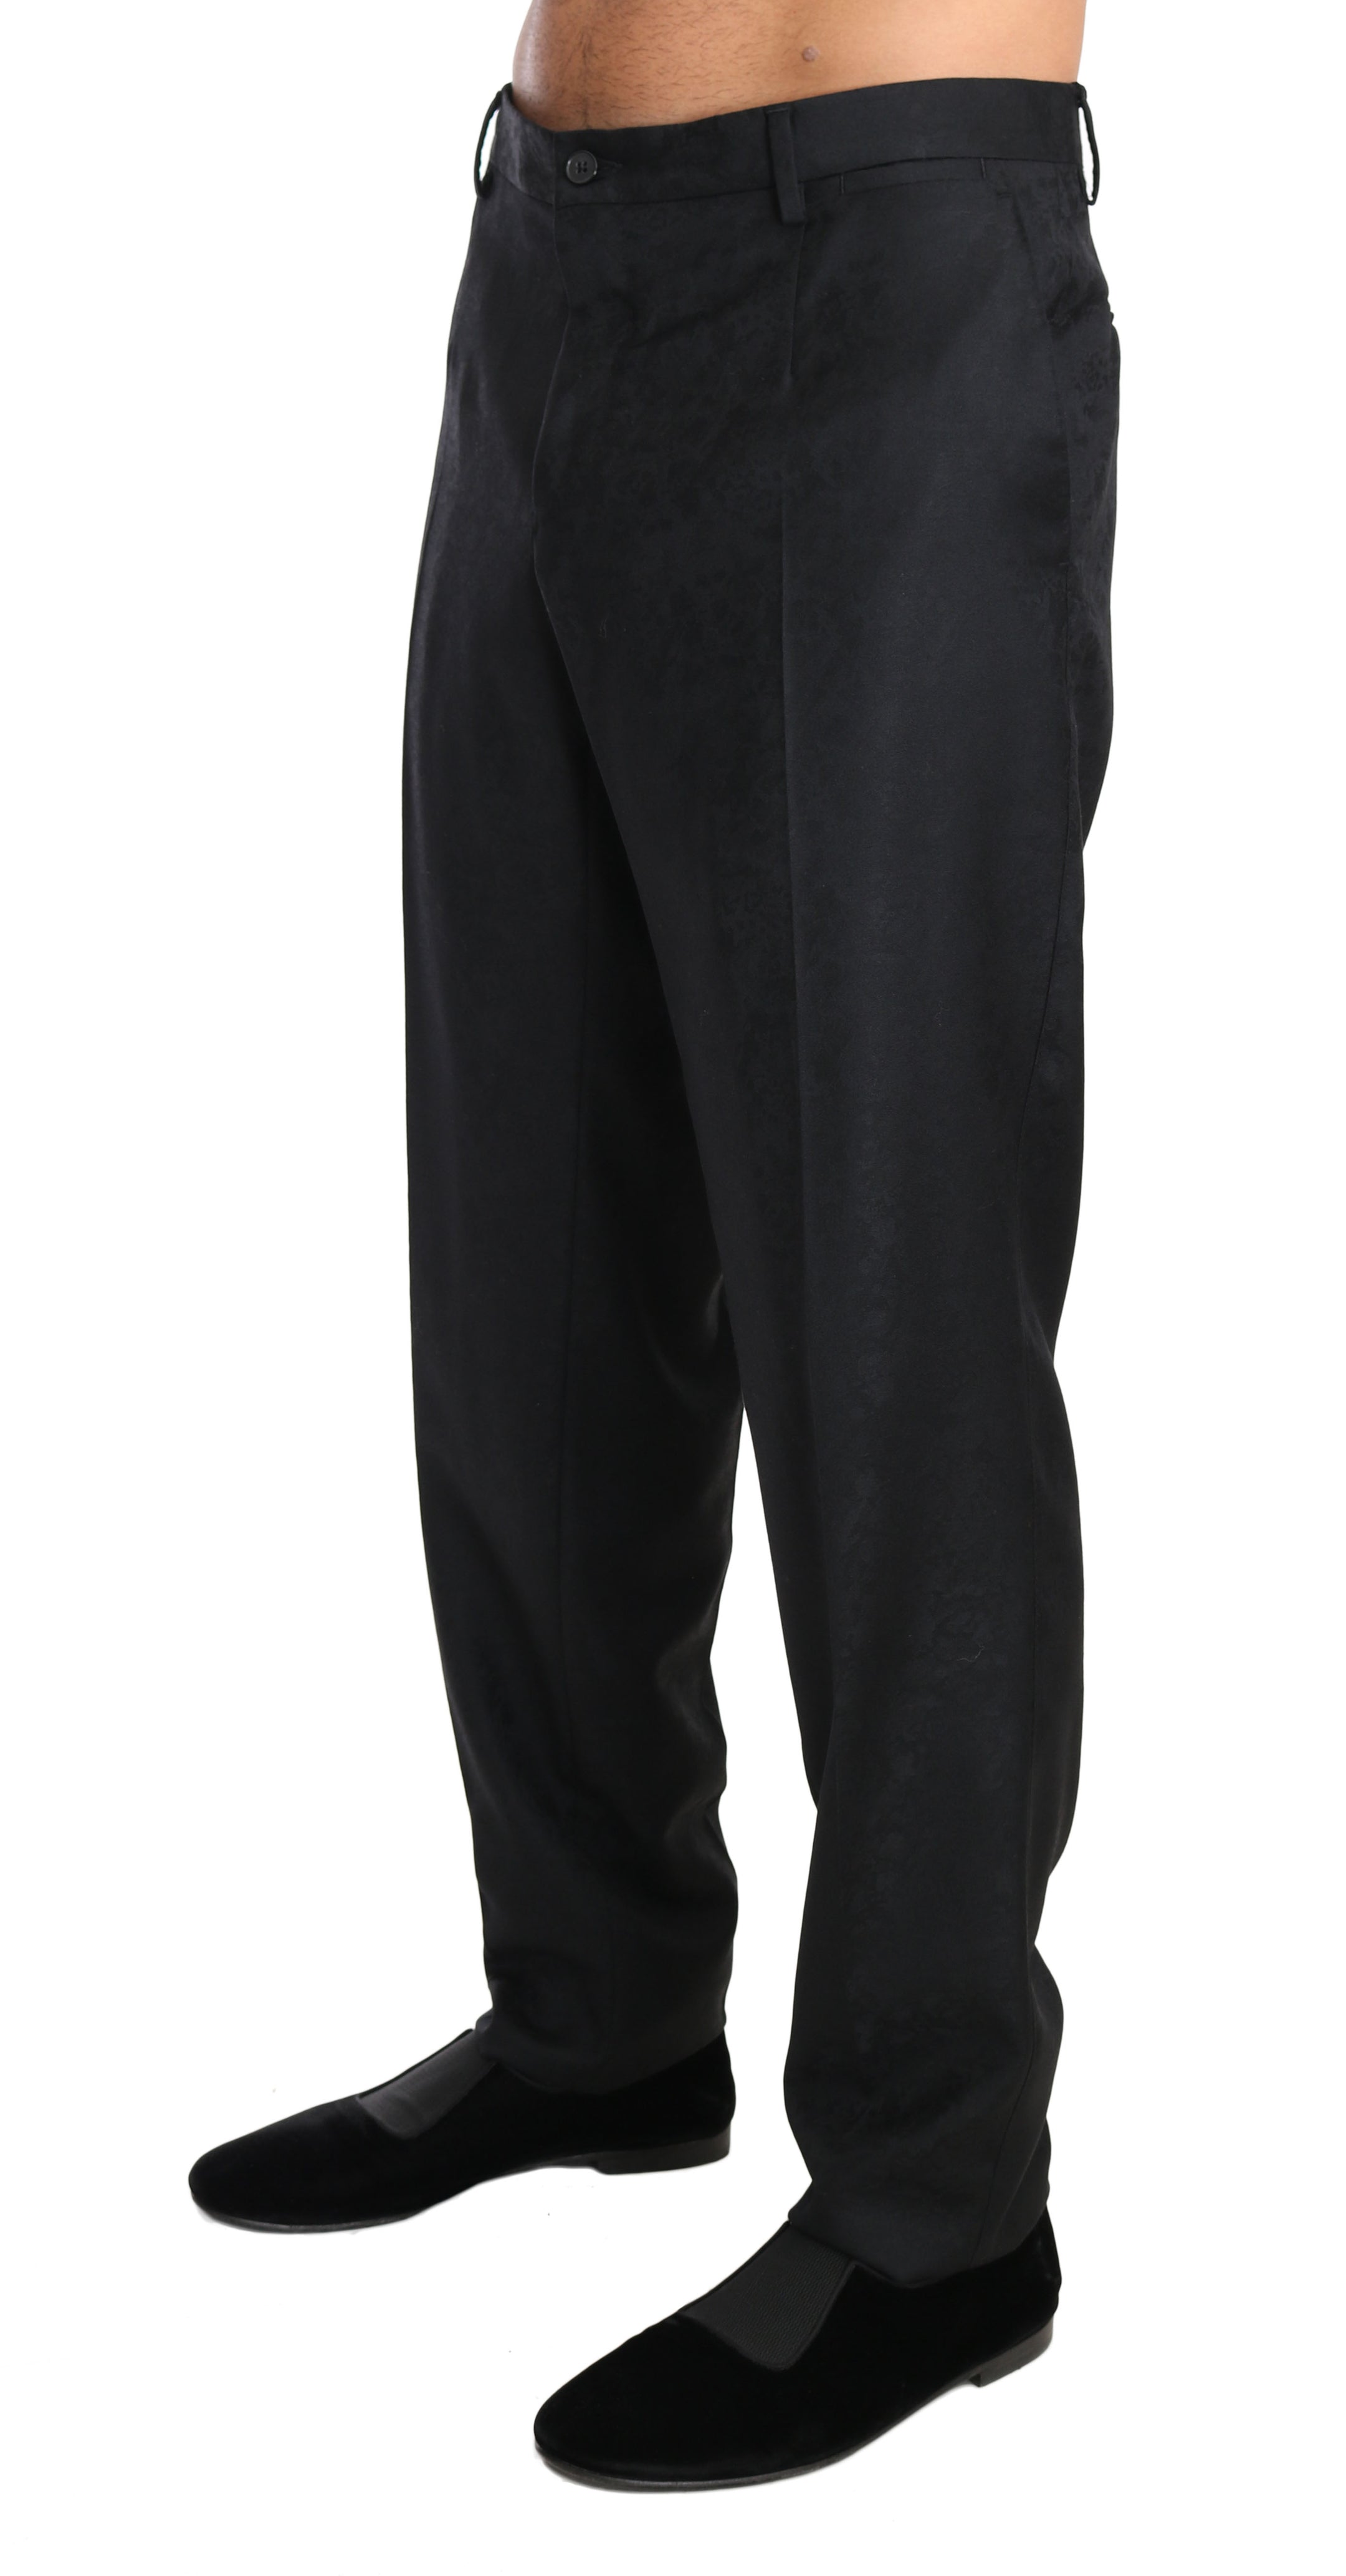 Buy Gray Cotton Patterned Formal Trousers by Dolce & Gabbana